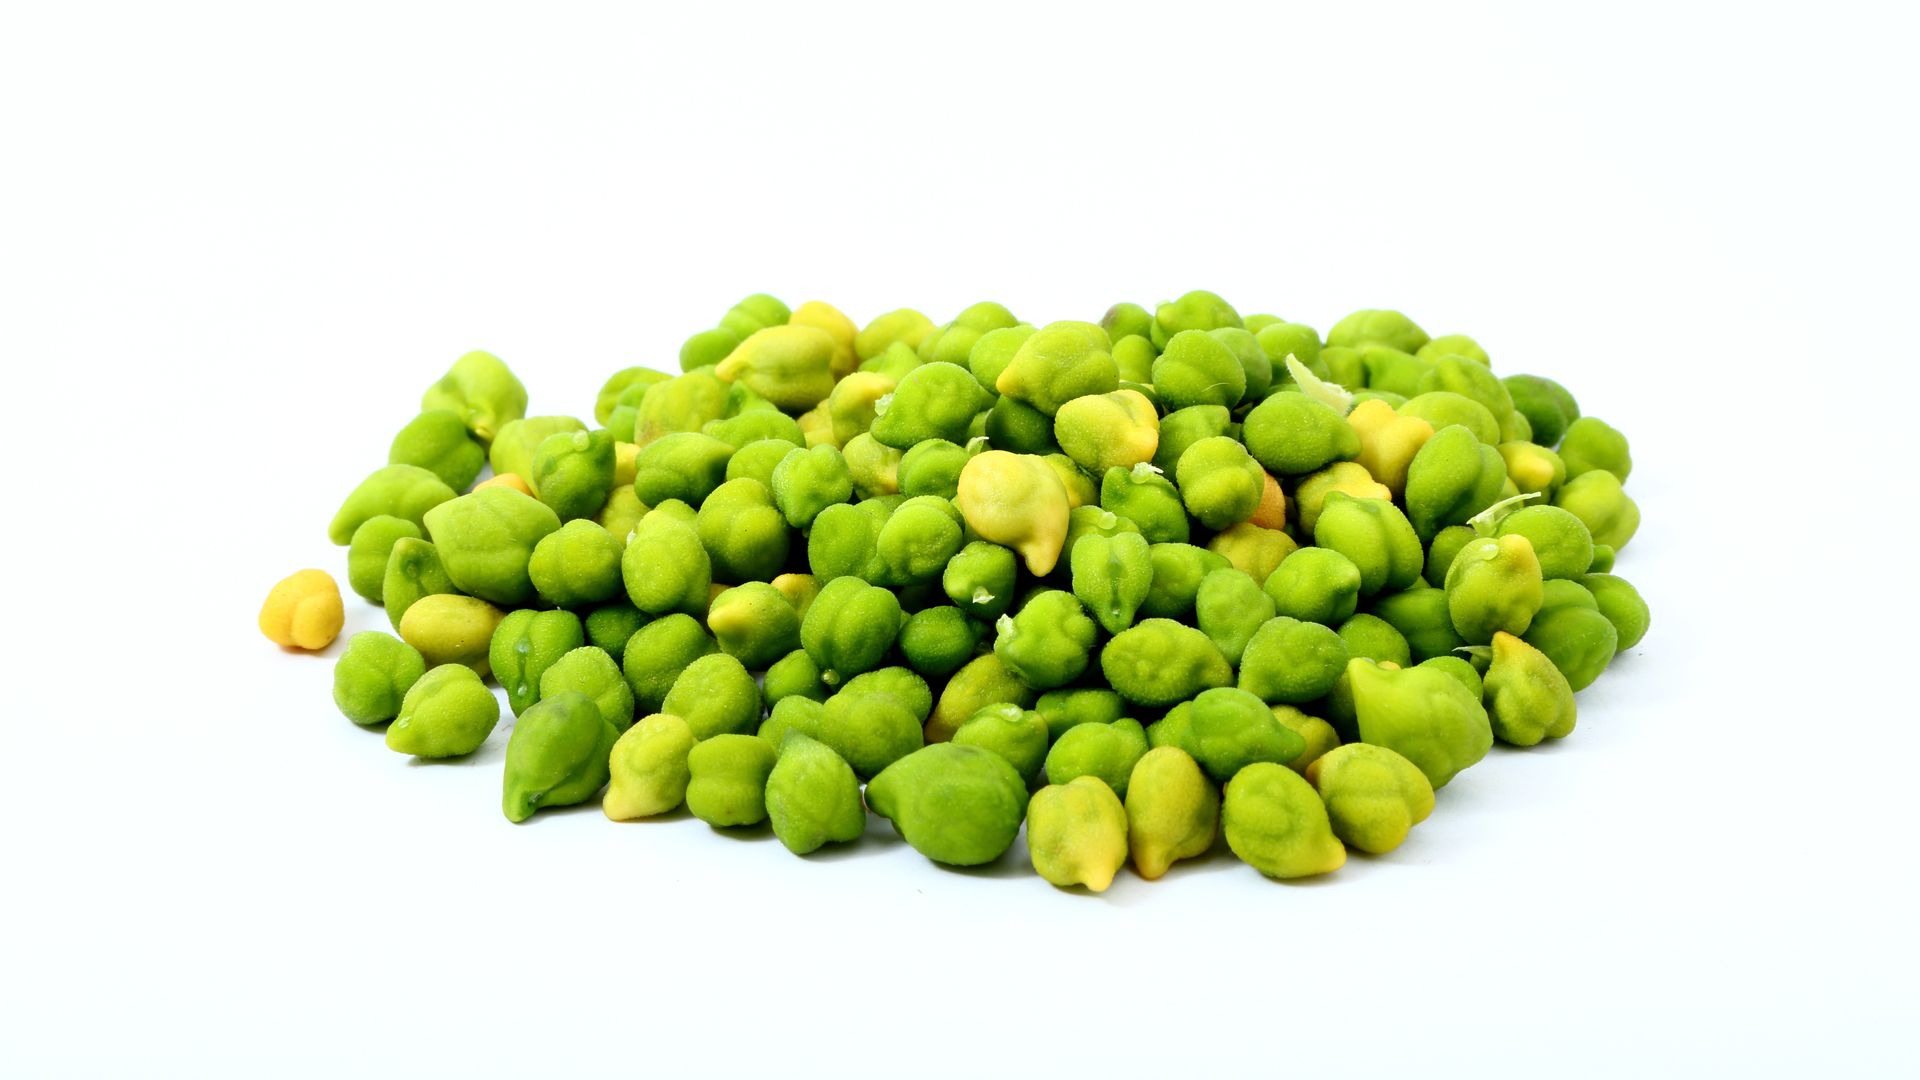 What are the benefits of green chickpeas?